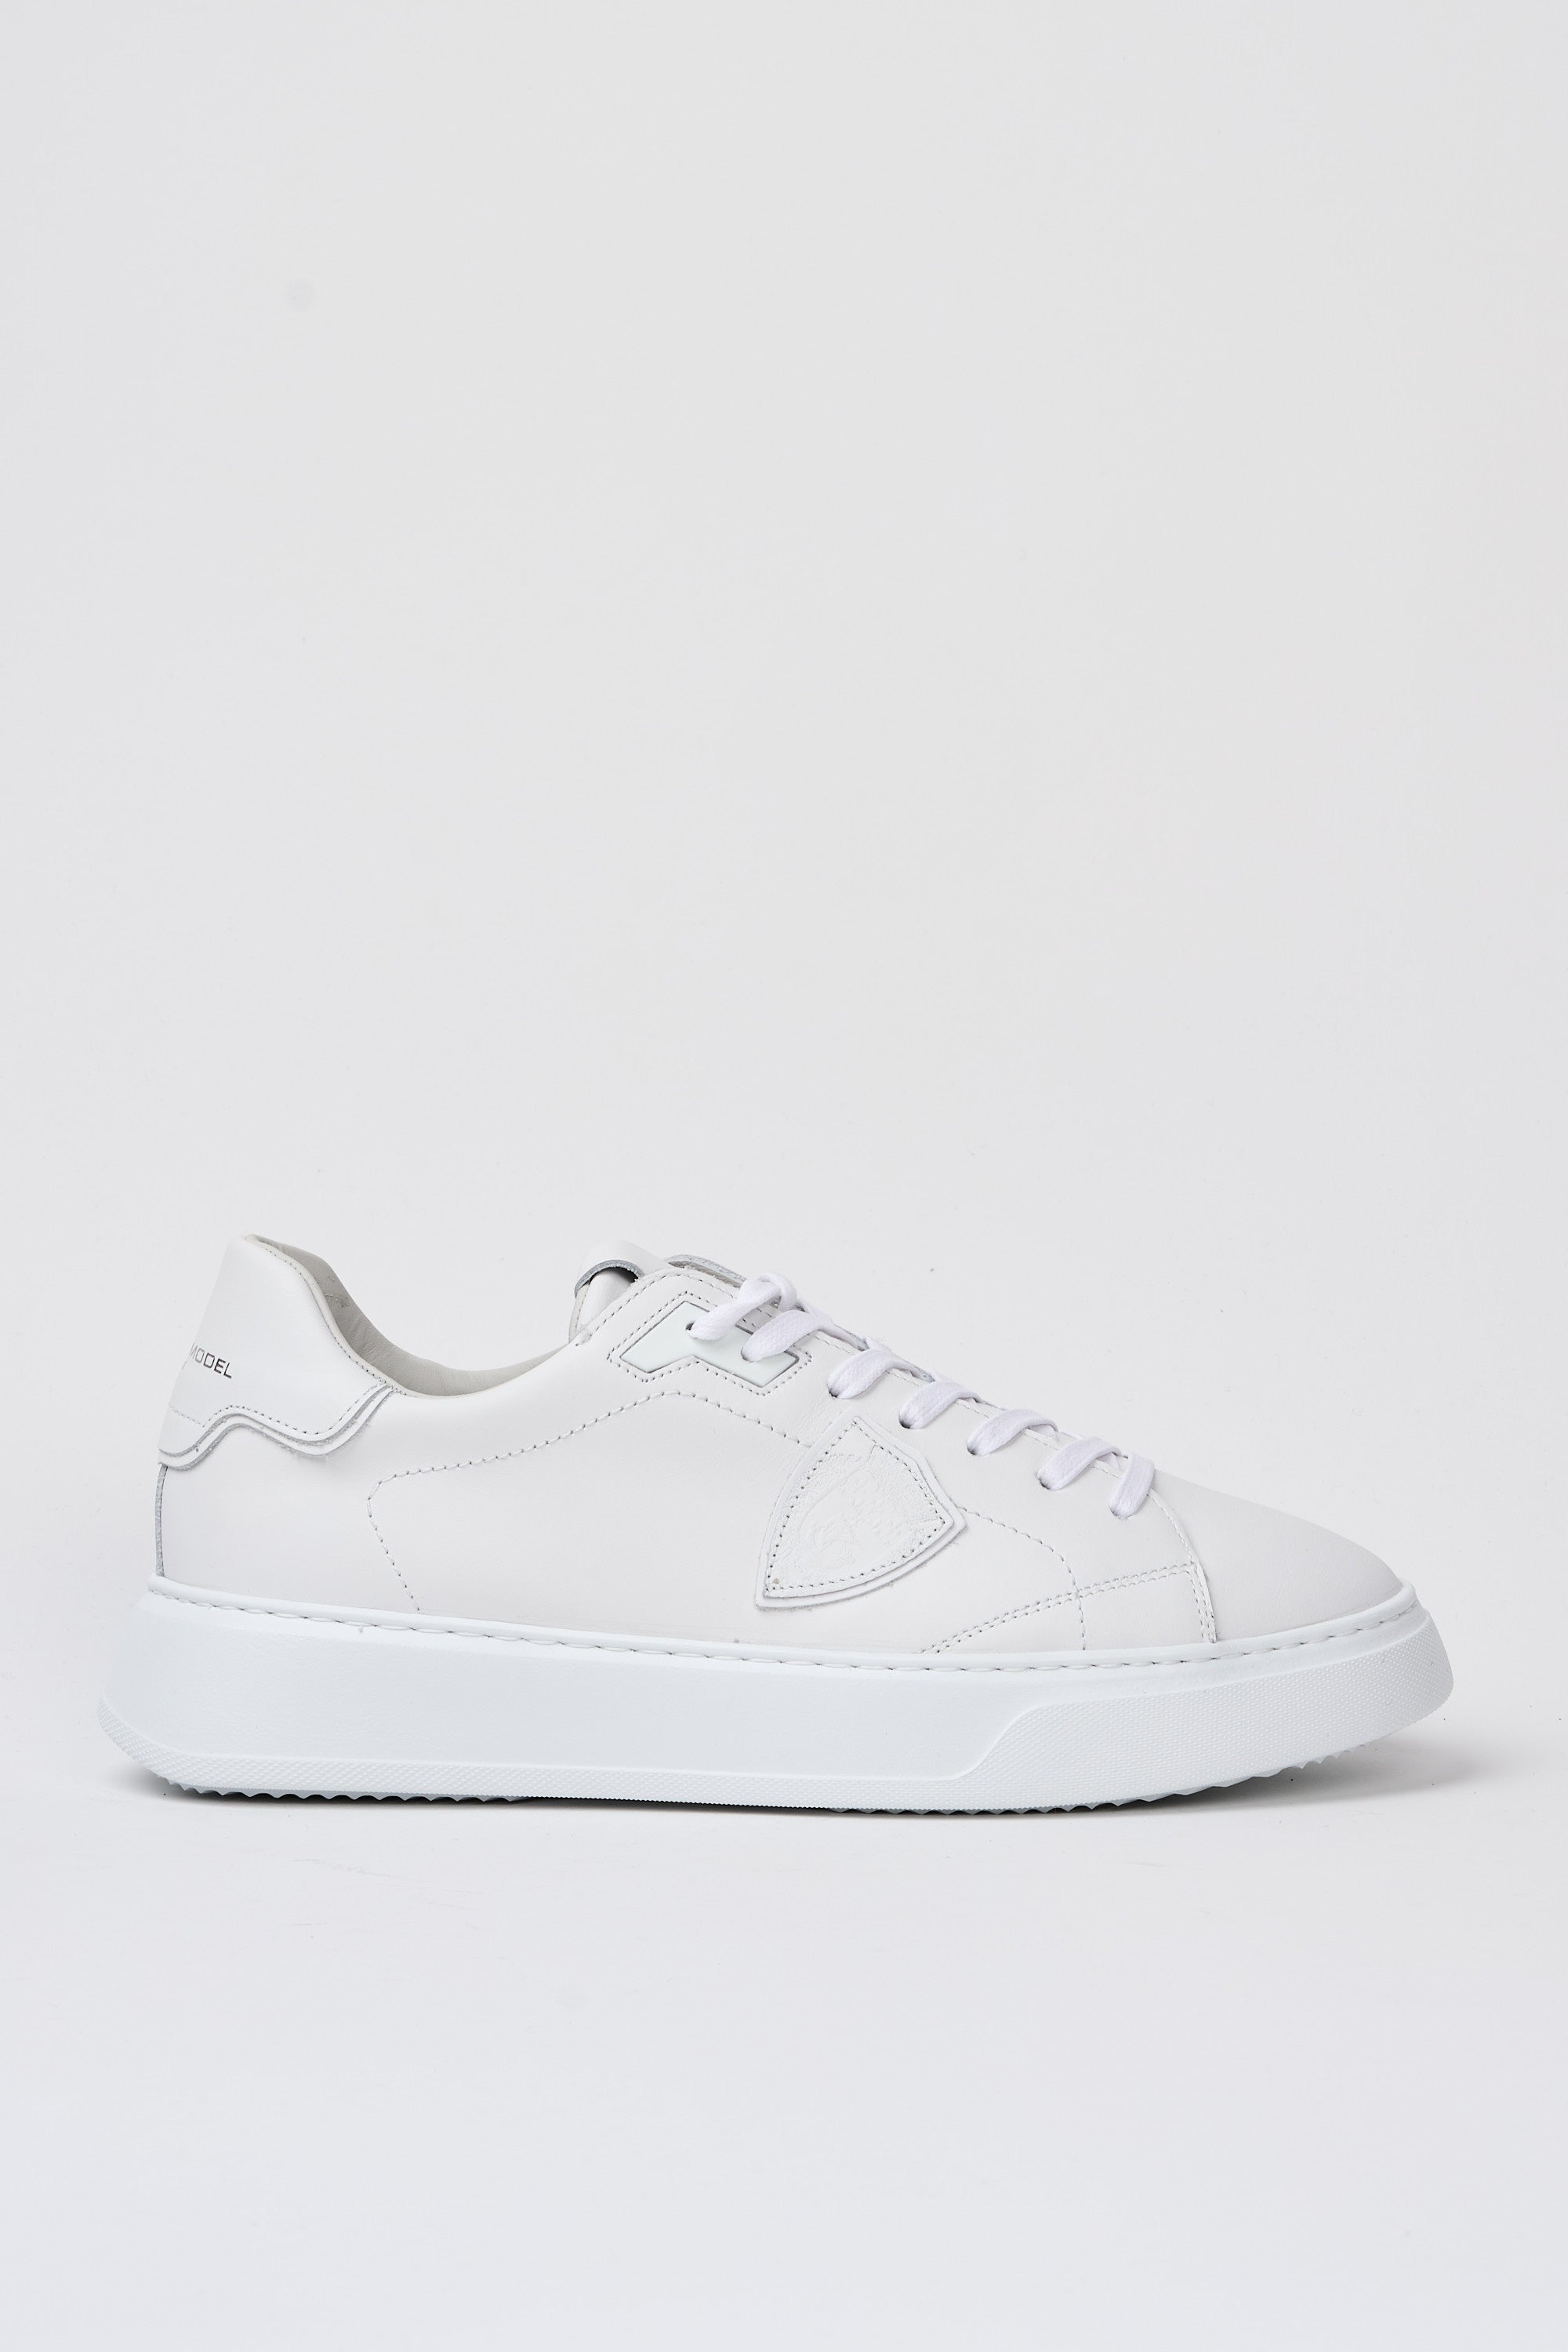 Philippe Model Sneakers Temple Leather White-1